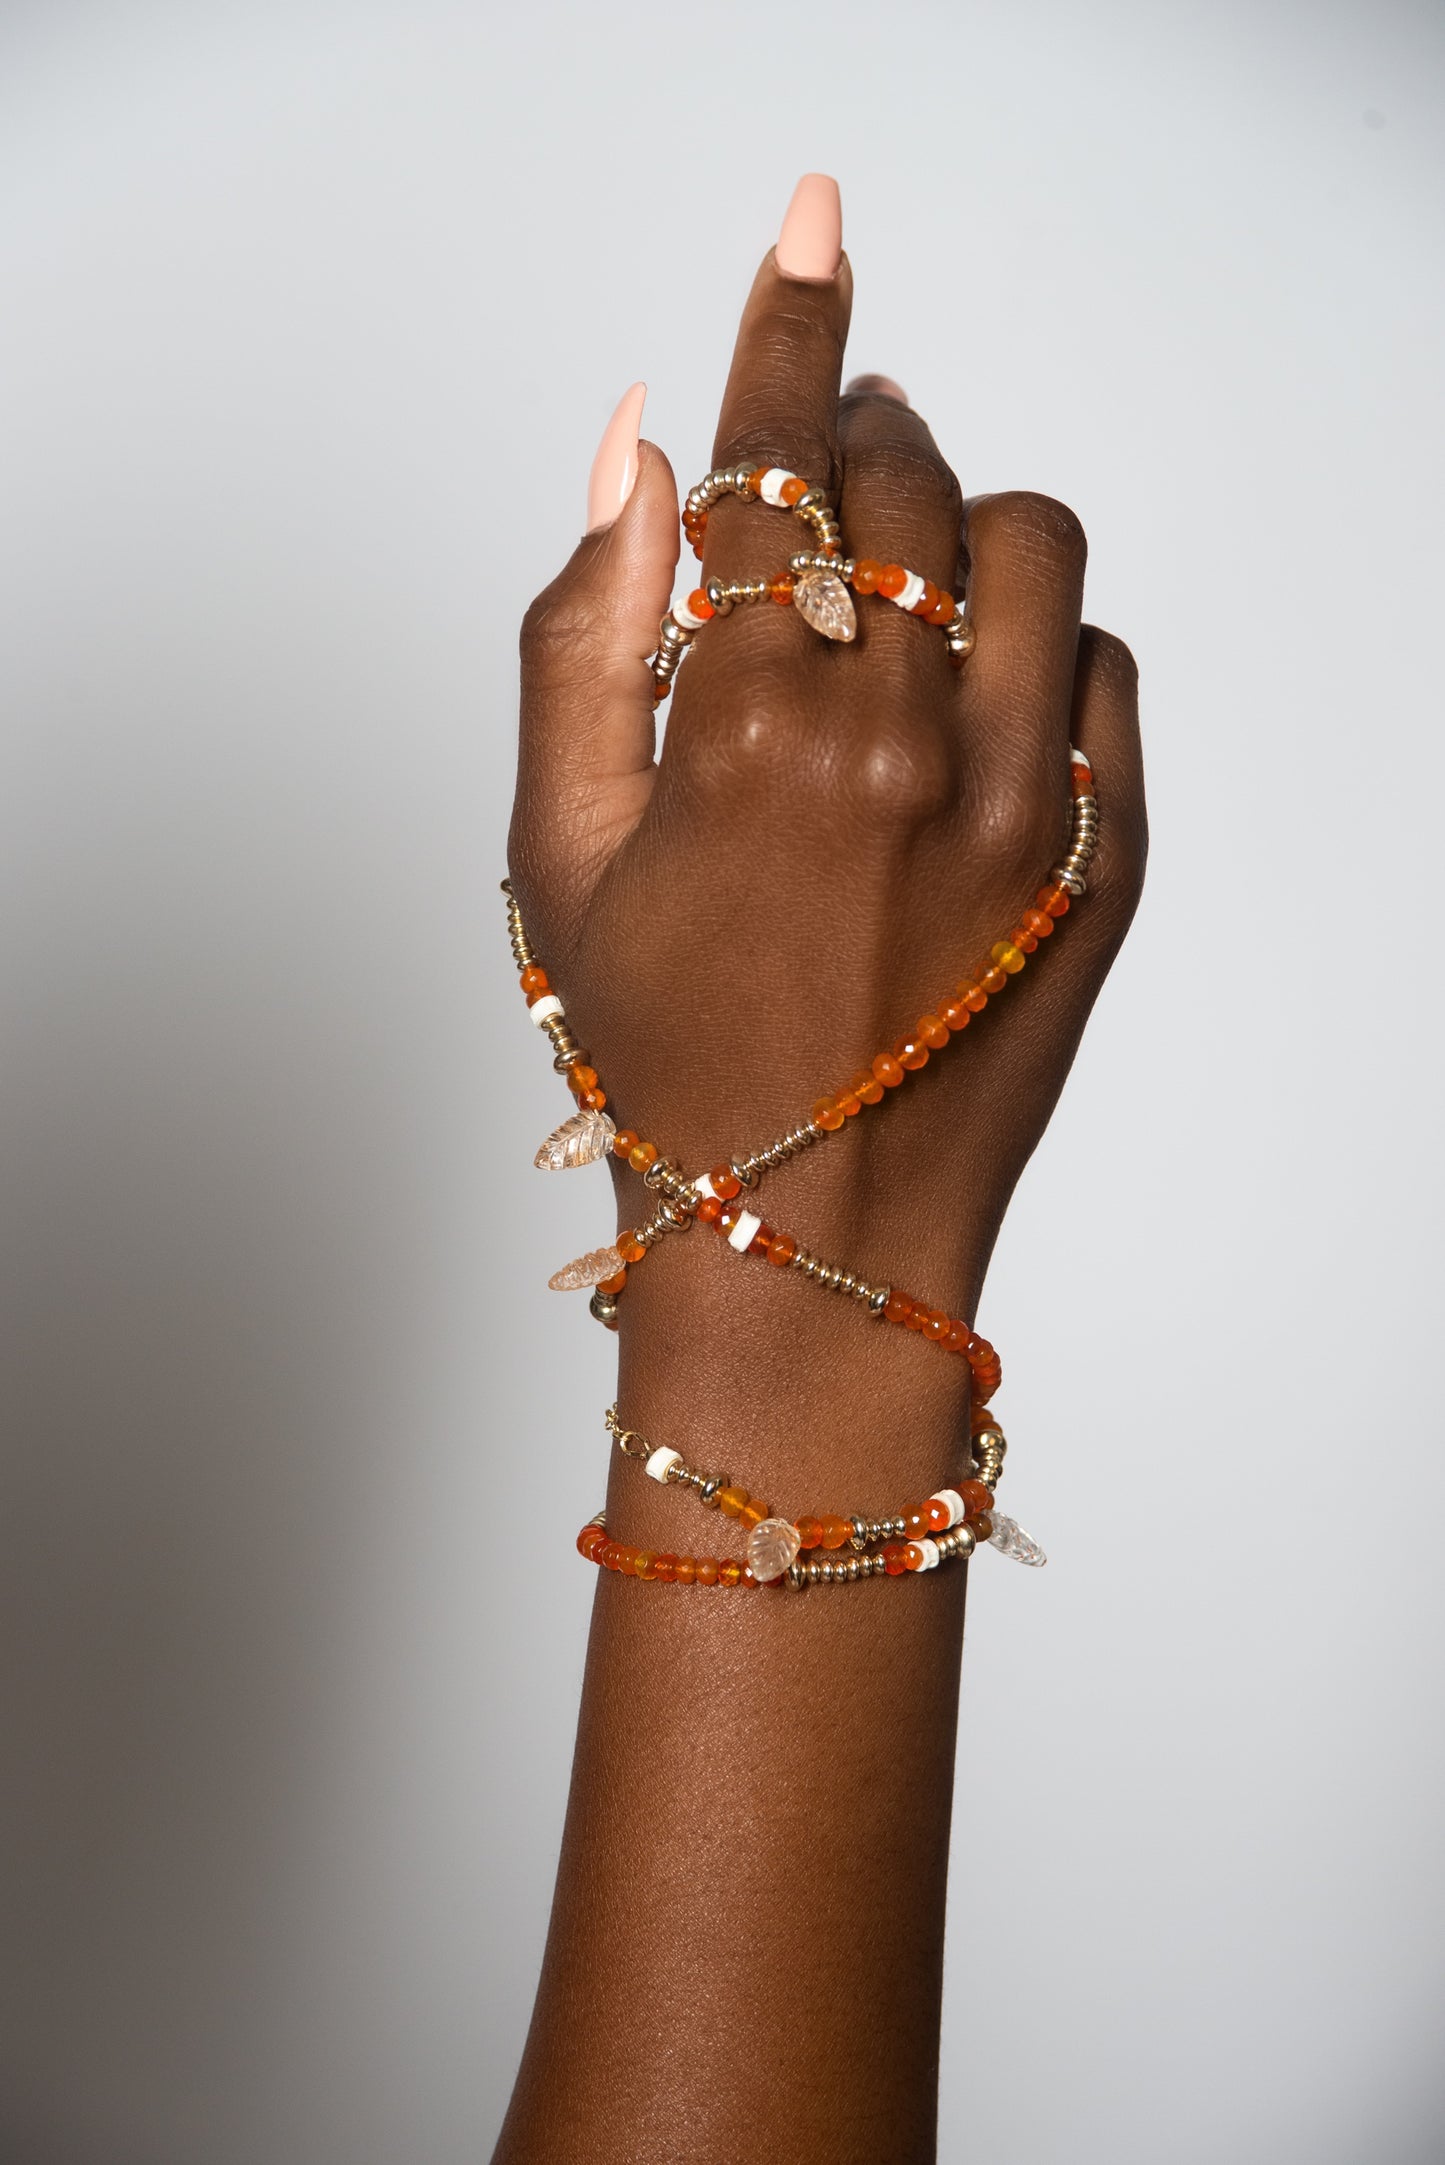 A woman's hand holding an Awaken bracelet from Ilium Wing, invoking the playful energy of the Sacral Chakra.